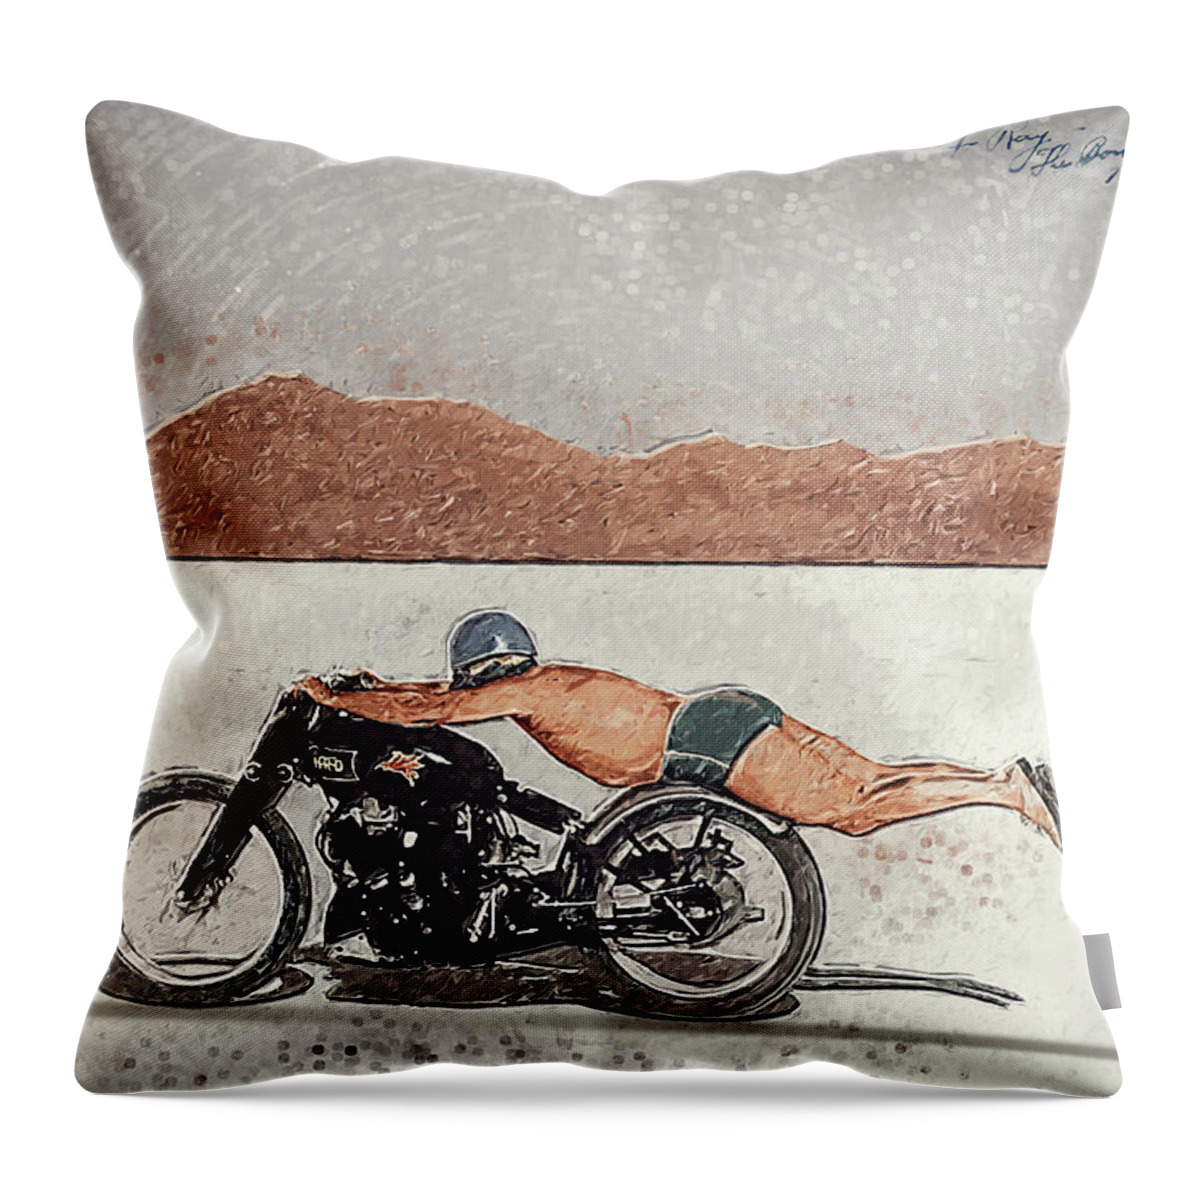 Motorcycle Throw Pillow featuring the digital art Roland Rollie Free by Yurdaer Bes